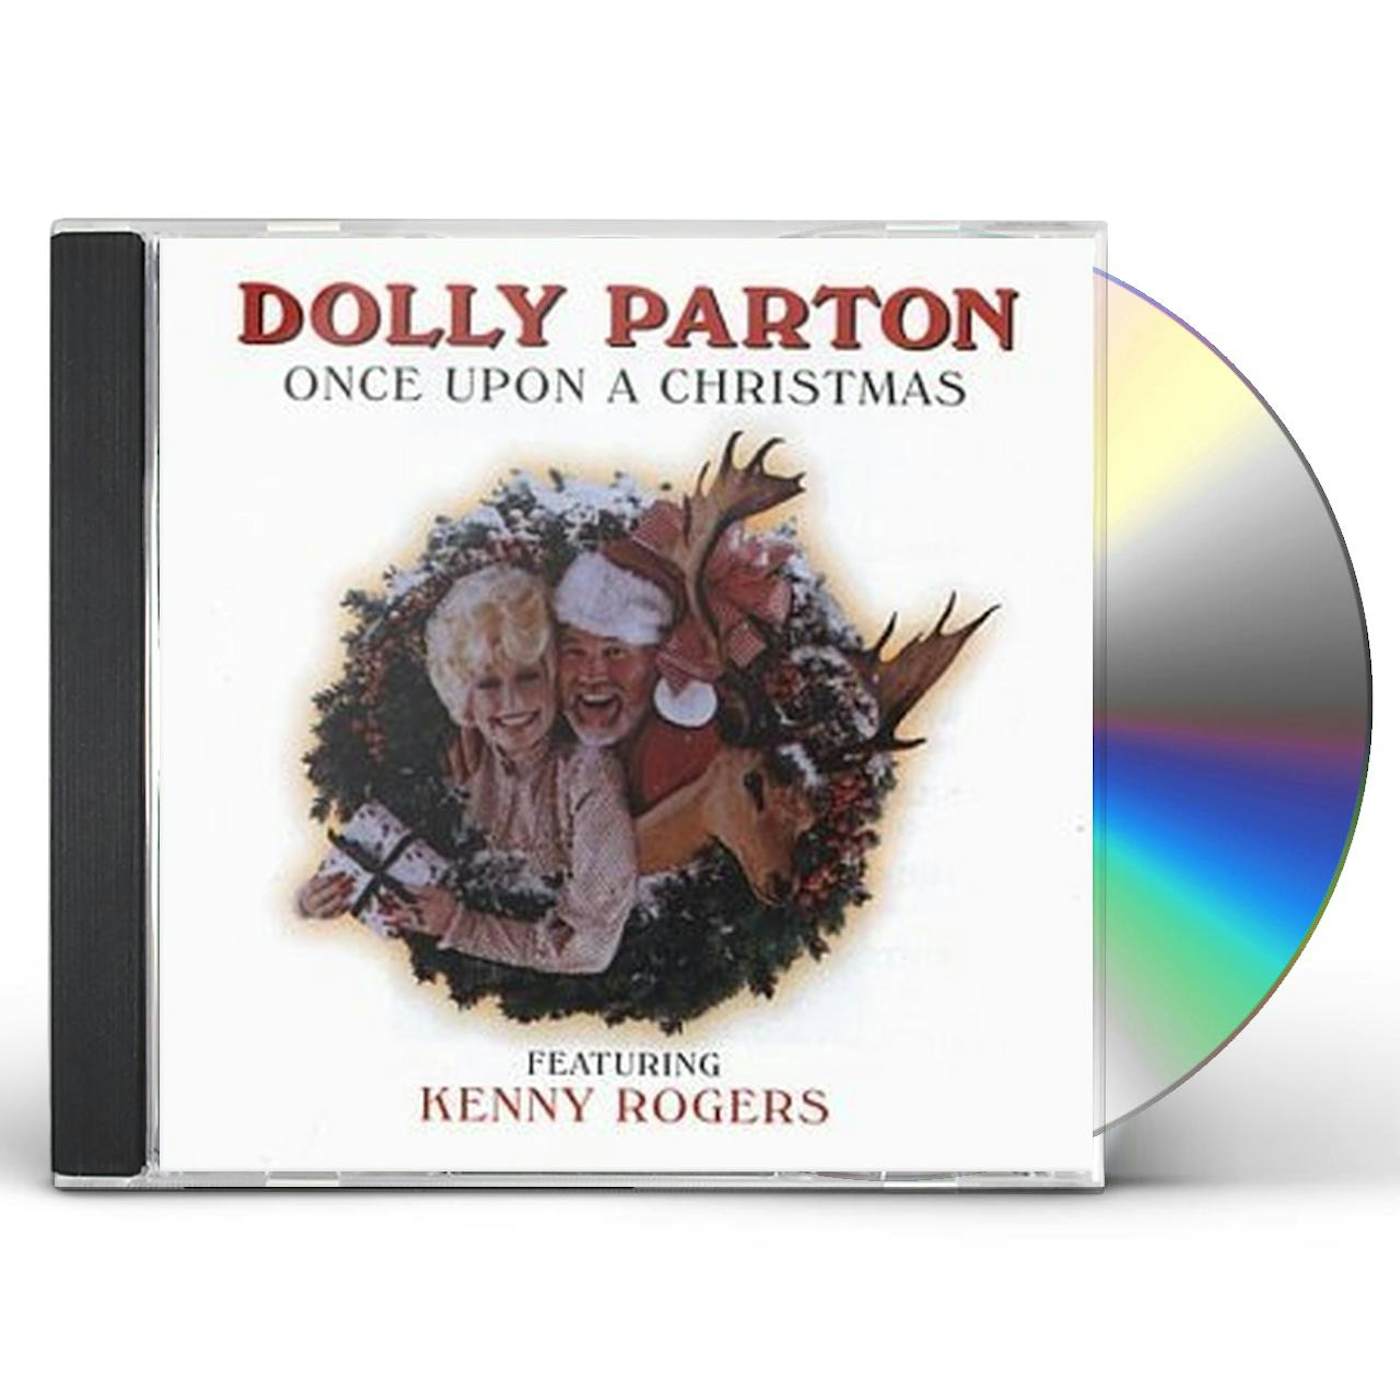 Once Upon A Christmas - Album by Dolly Parton